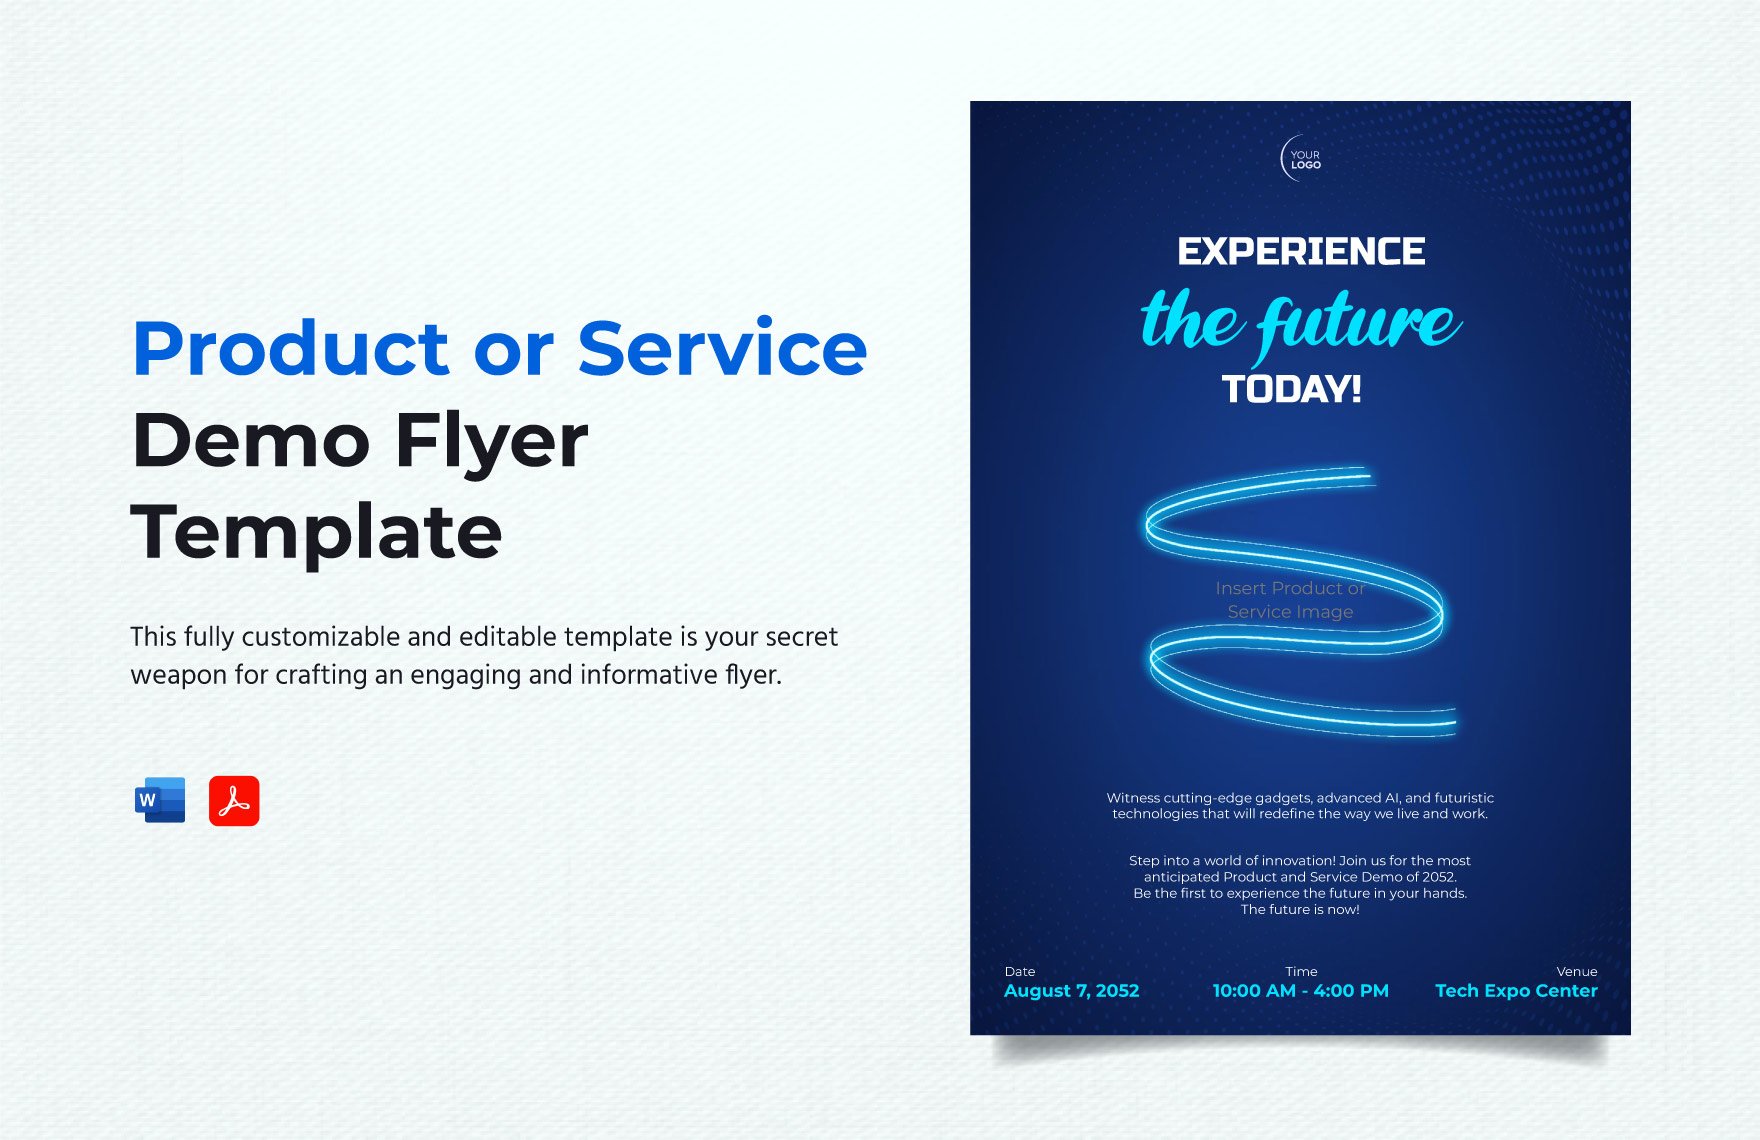 Product or Service Demo Flyer Template